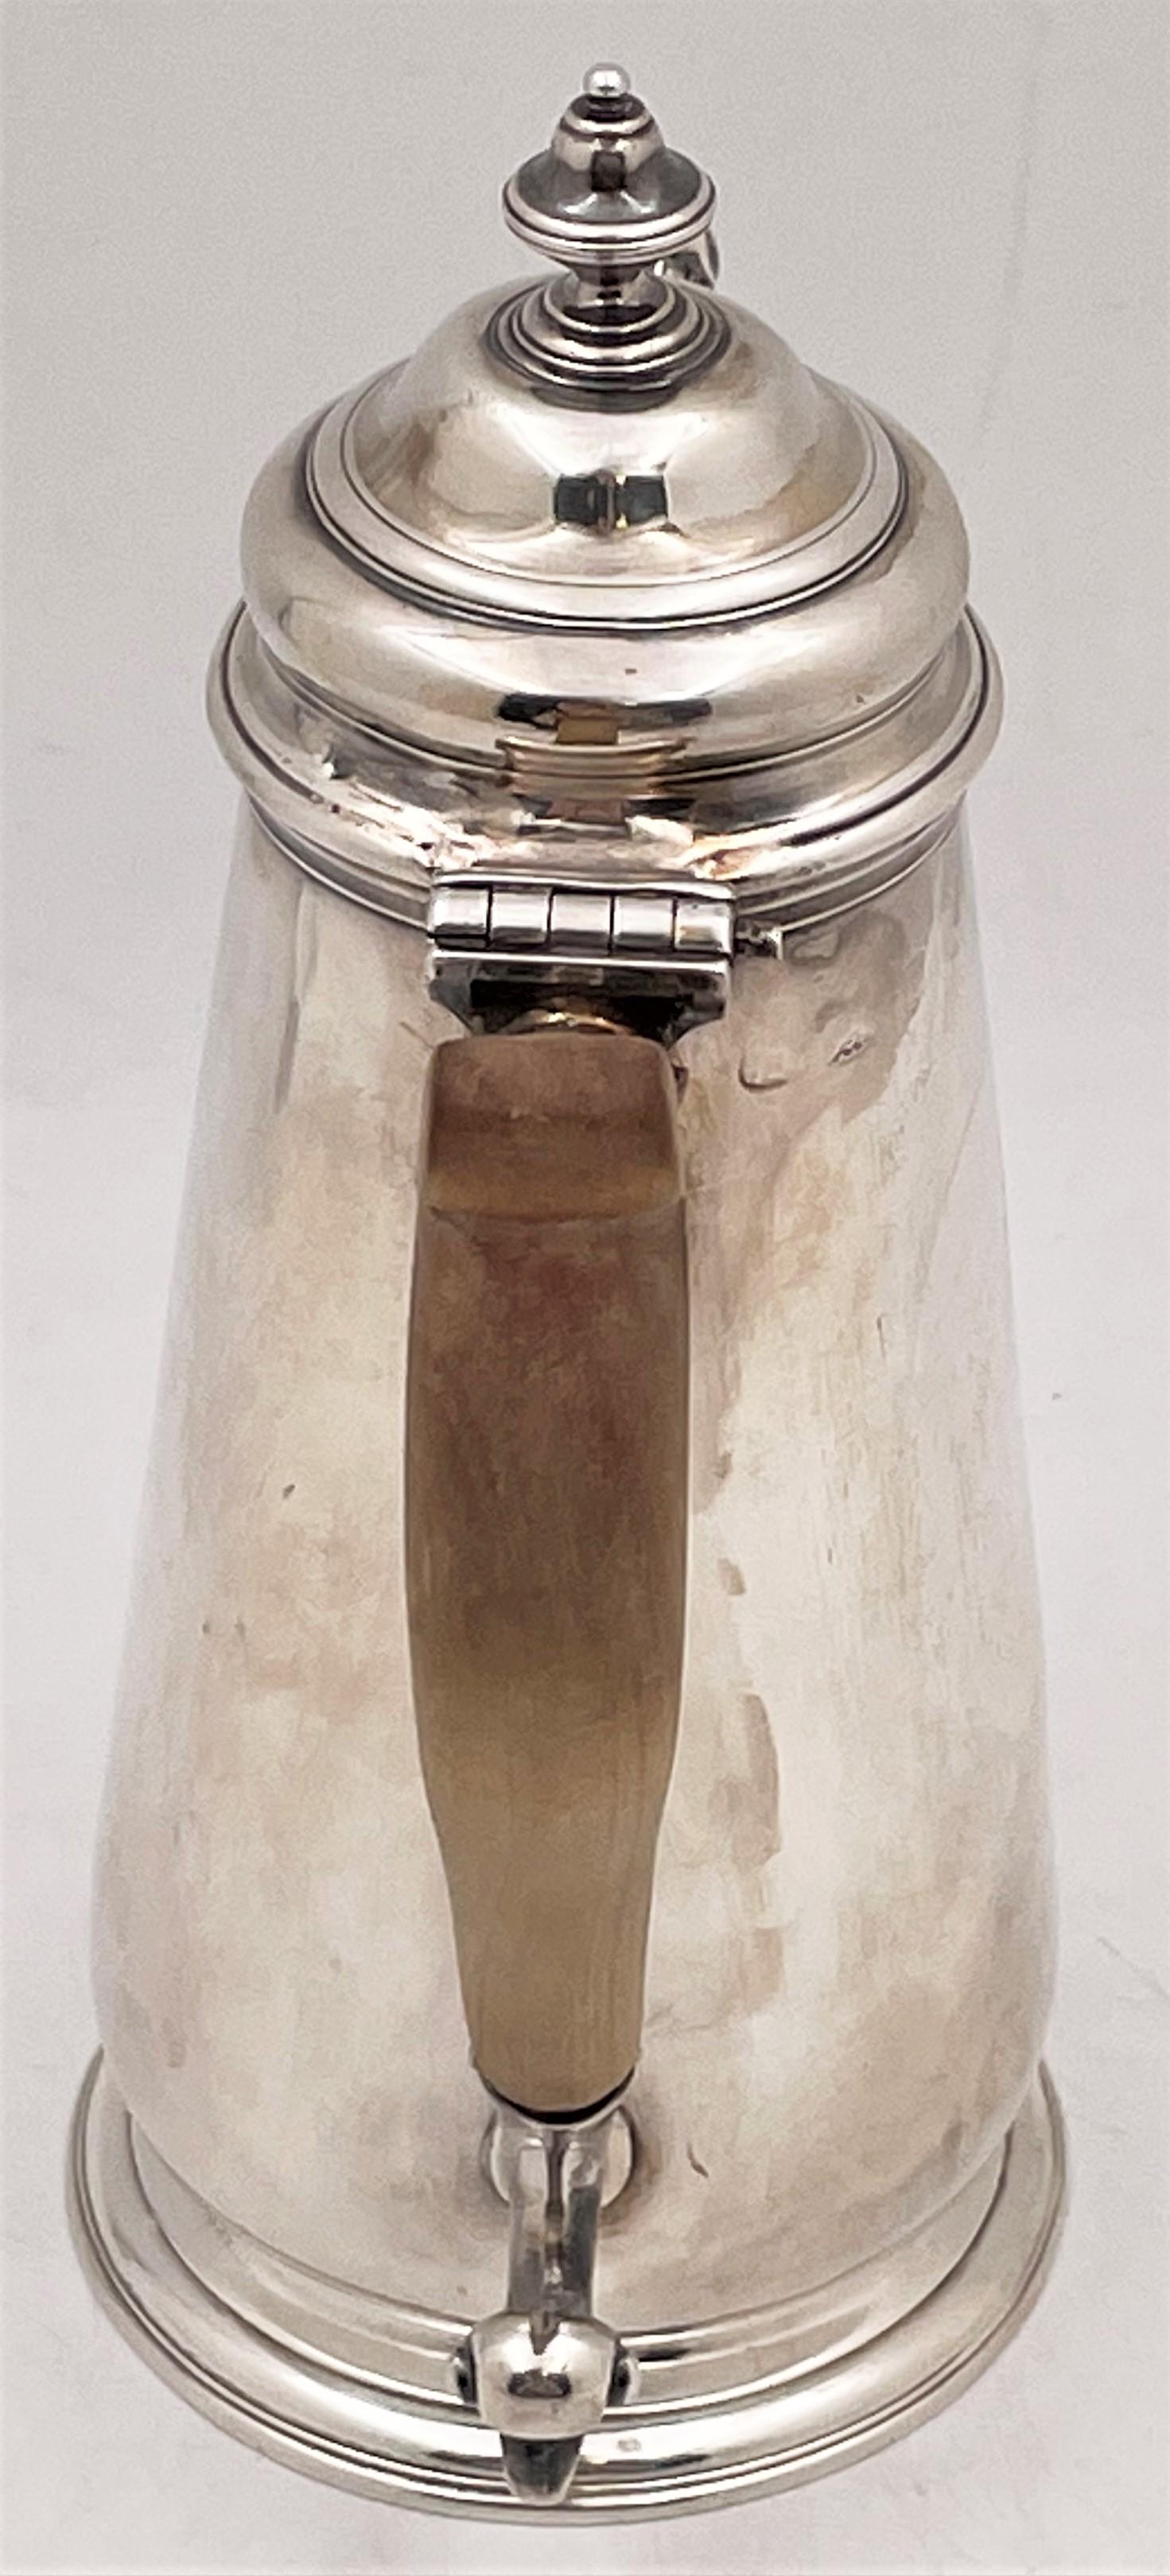 English, sterling silver coffee pot from the Georgian era (late 18th/early 19th century) with a wood handle. It measures 8 1/8'' in height by 6 3/4'' from handle to spout, weighs 14.2 troy ounces, and bears faint hallmarks as shown.

Please feel